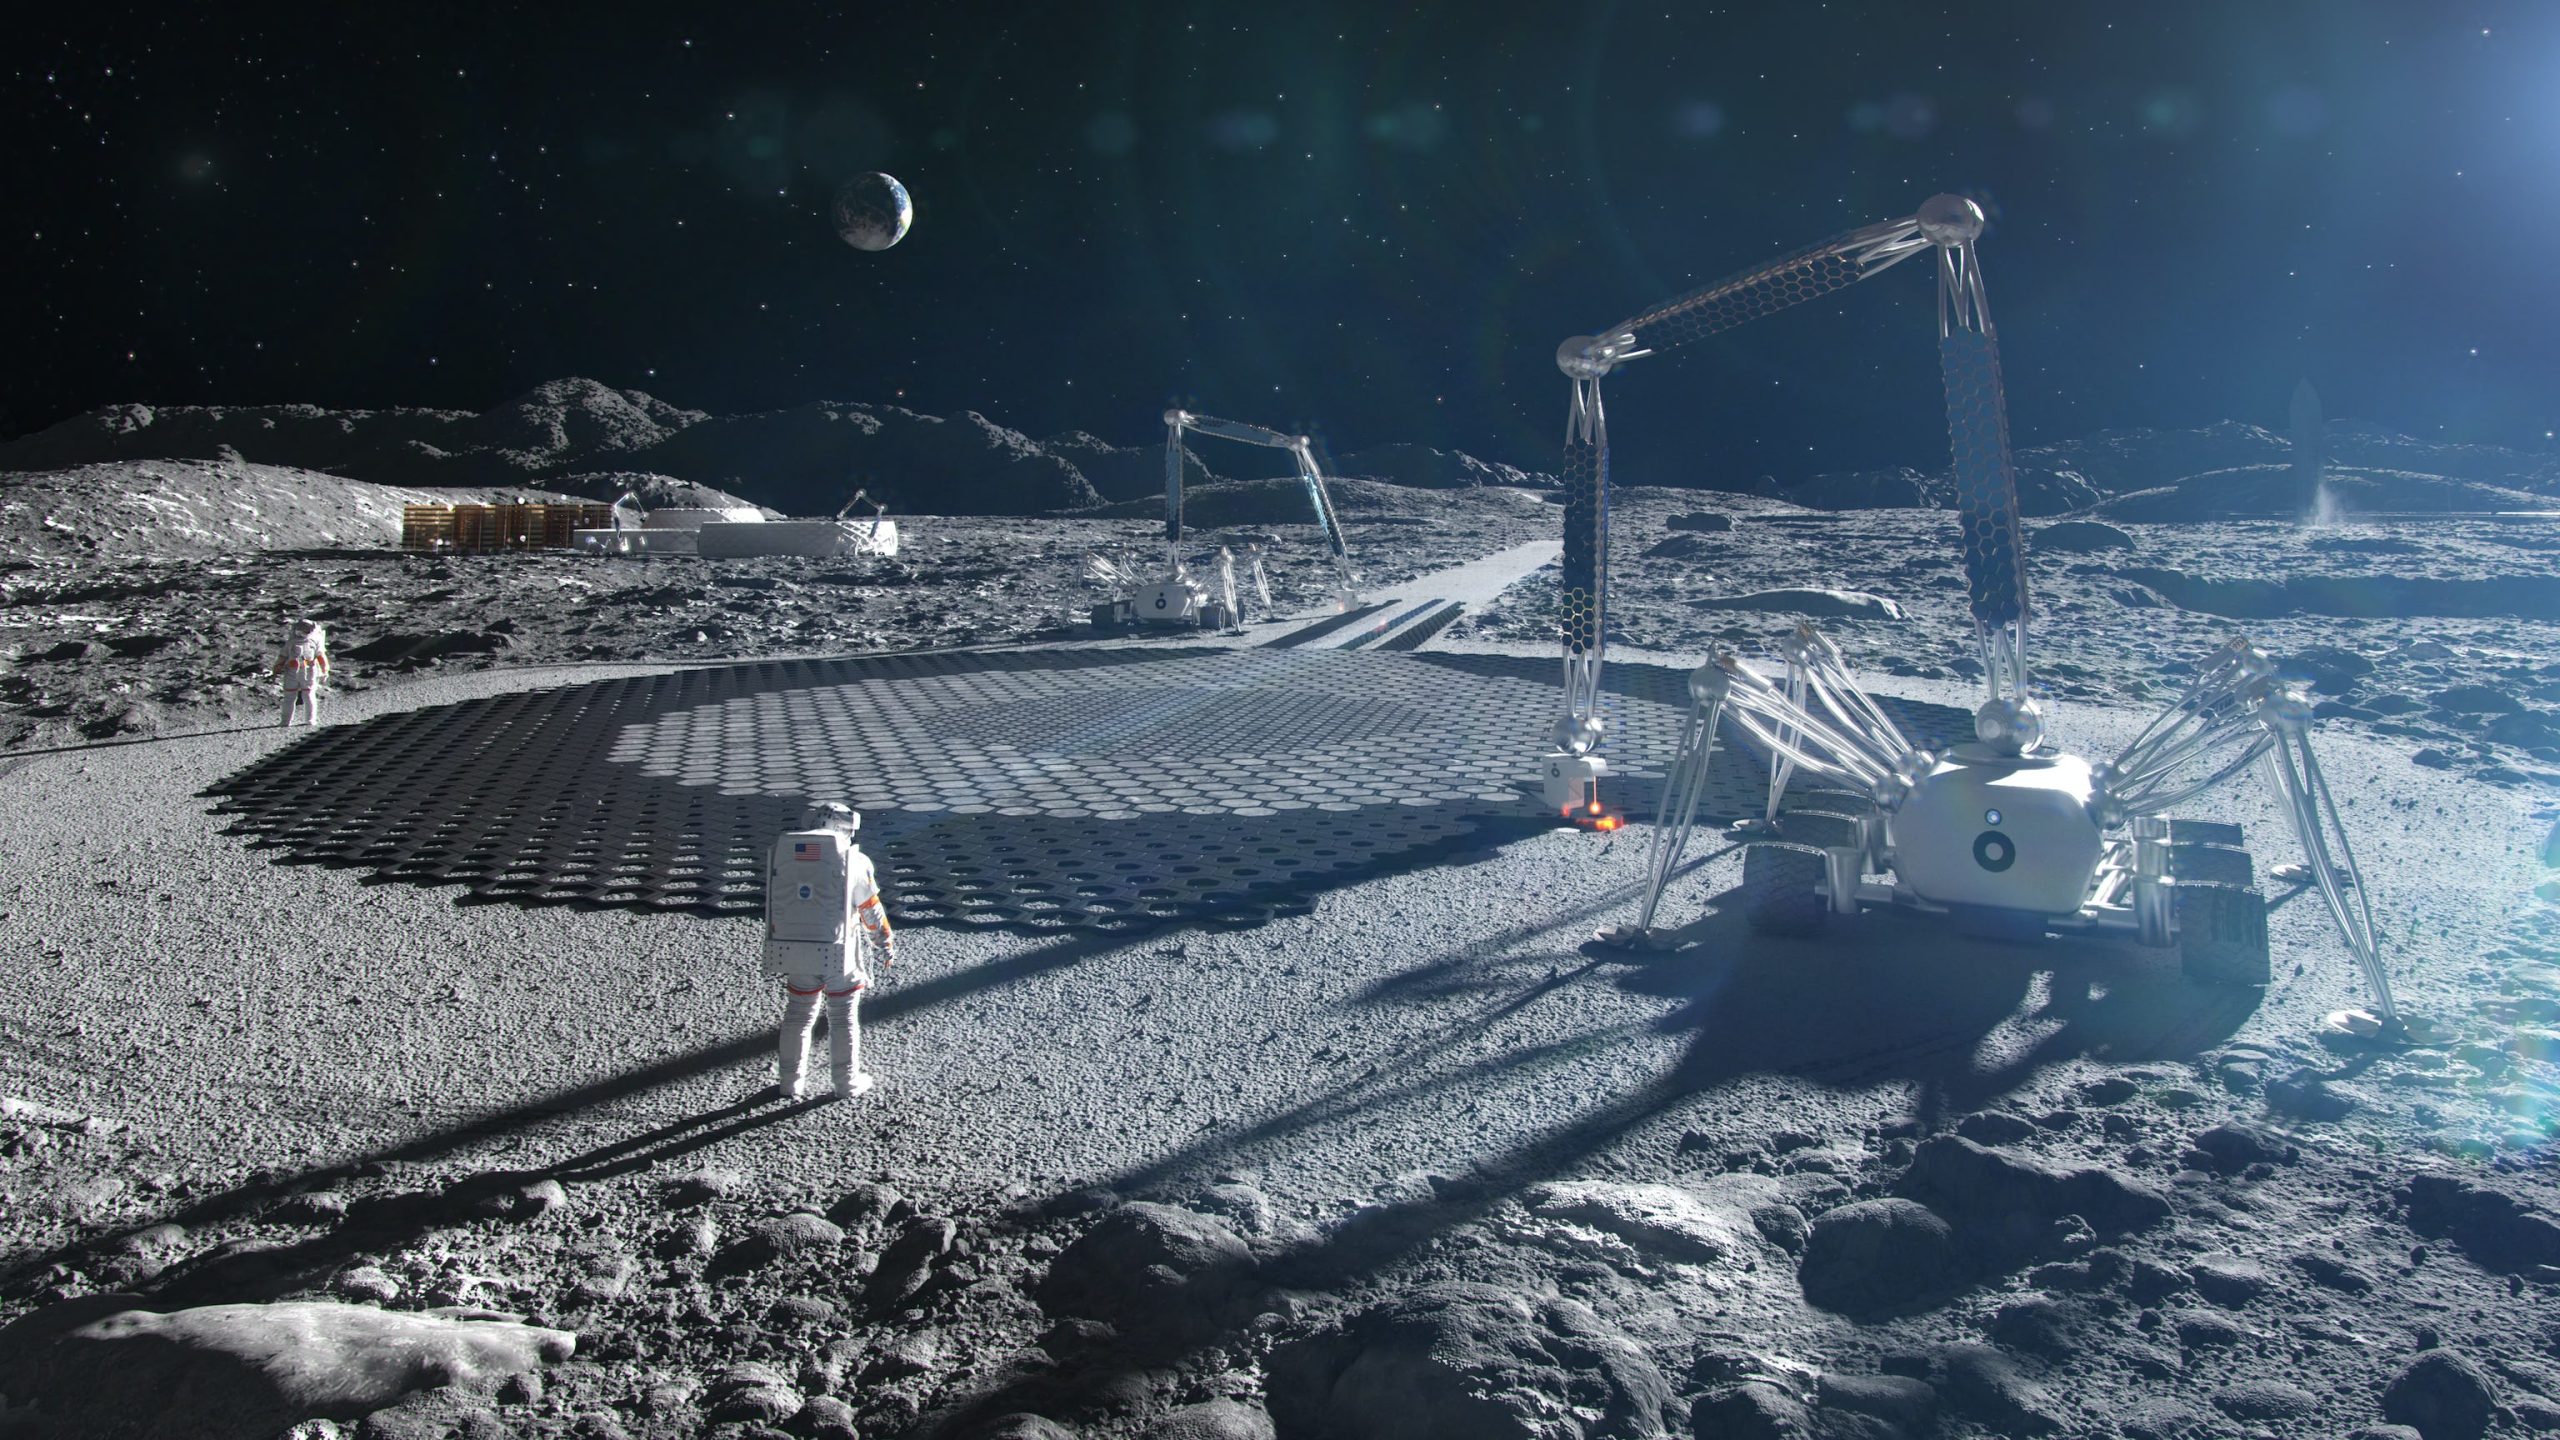 NASA gives ICON millions for huge 3D printer on the moon